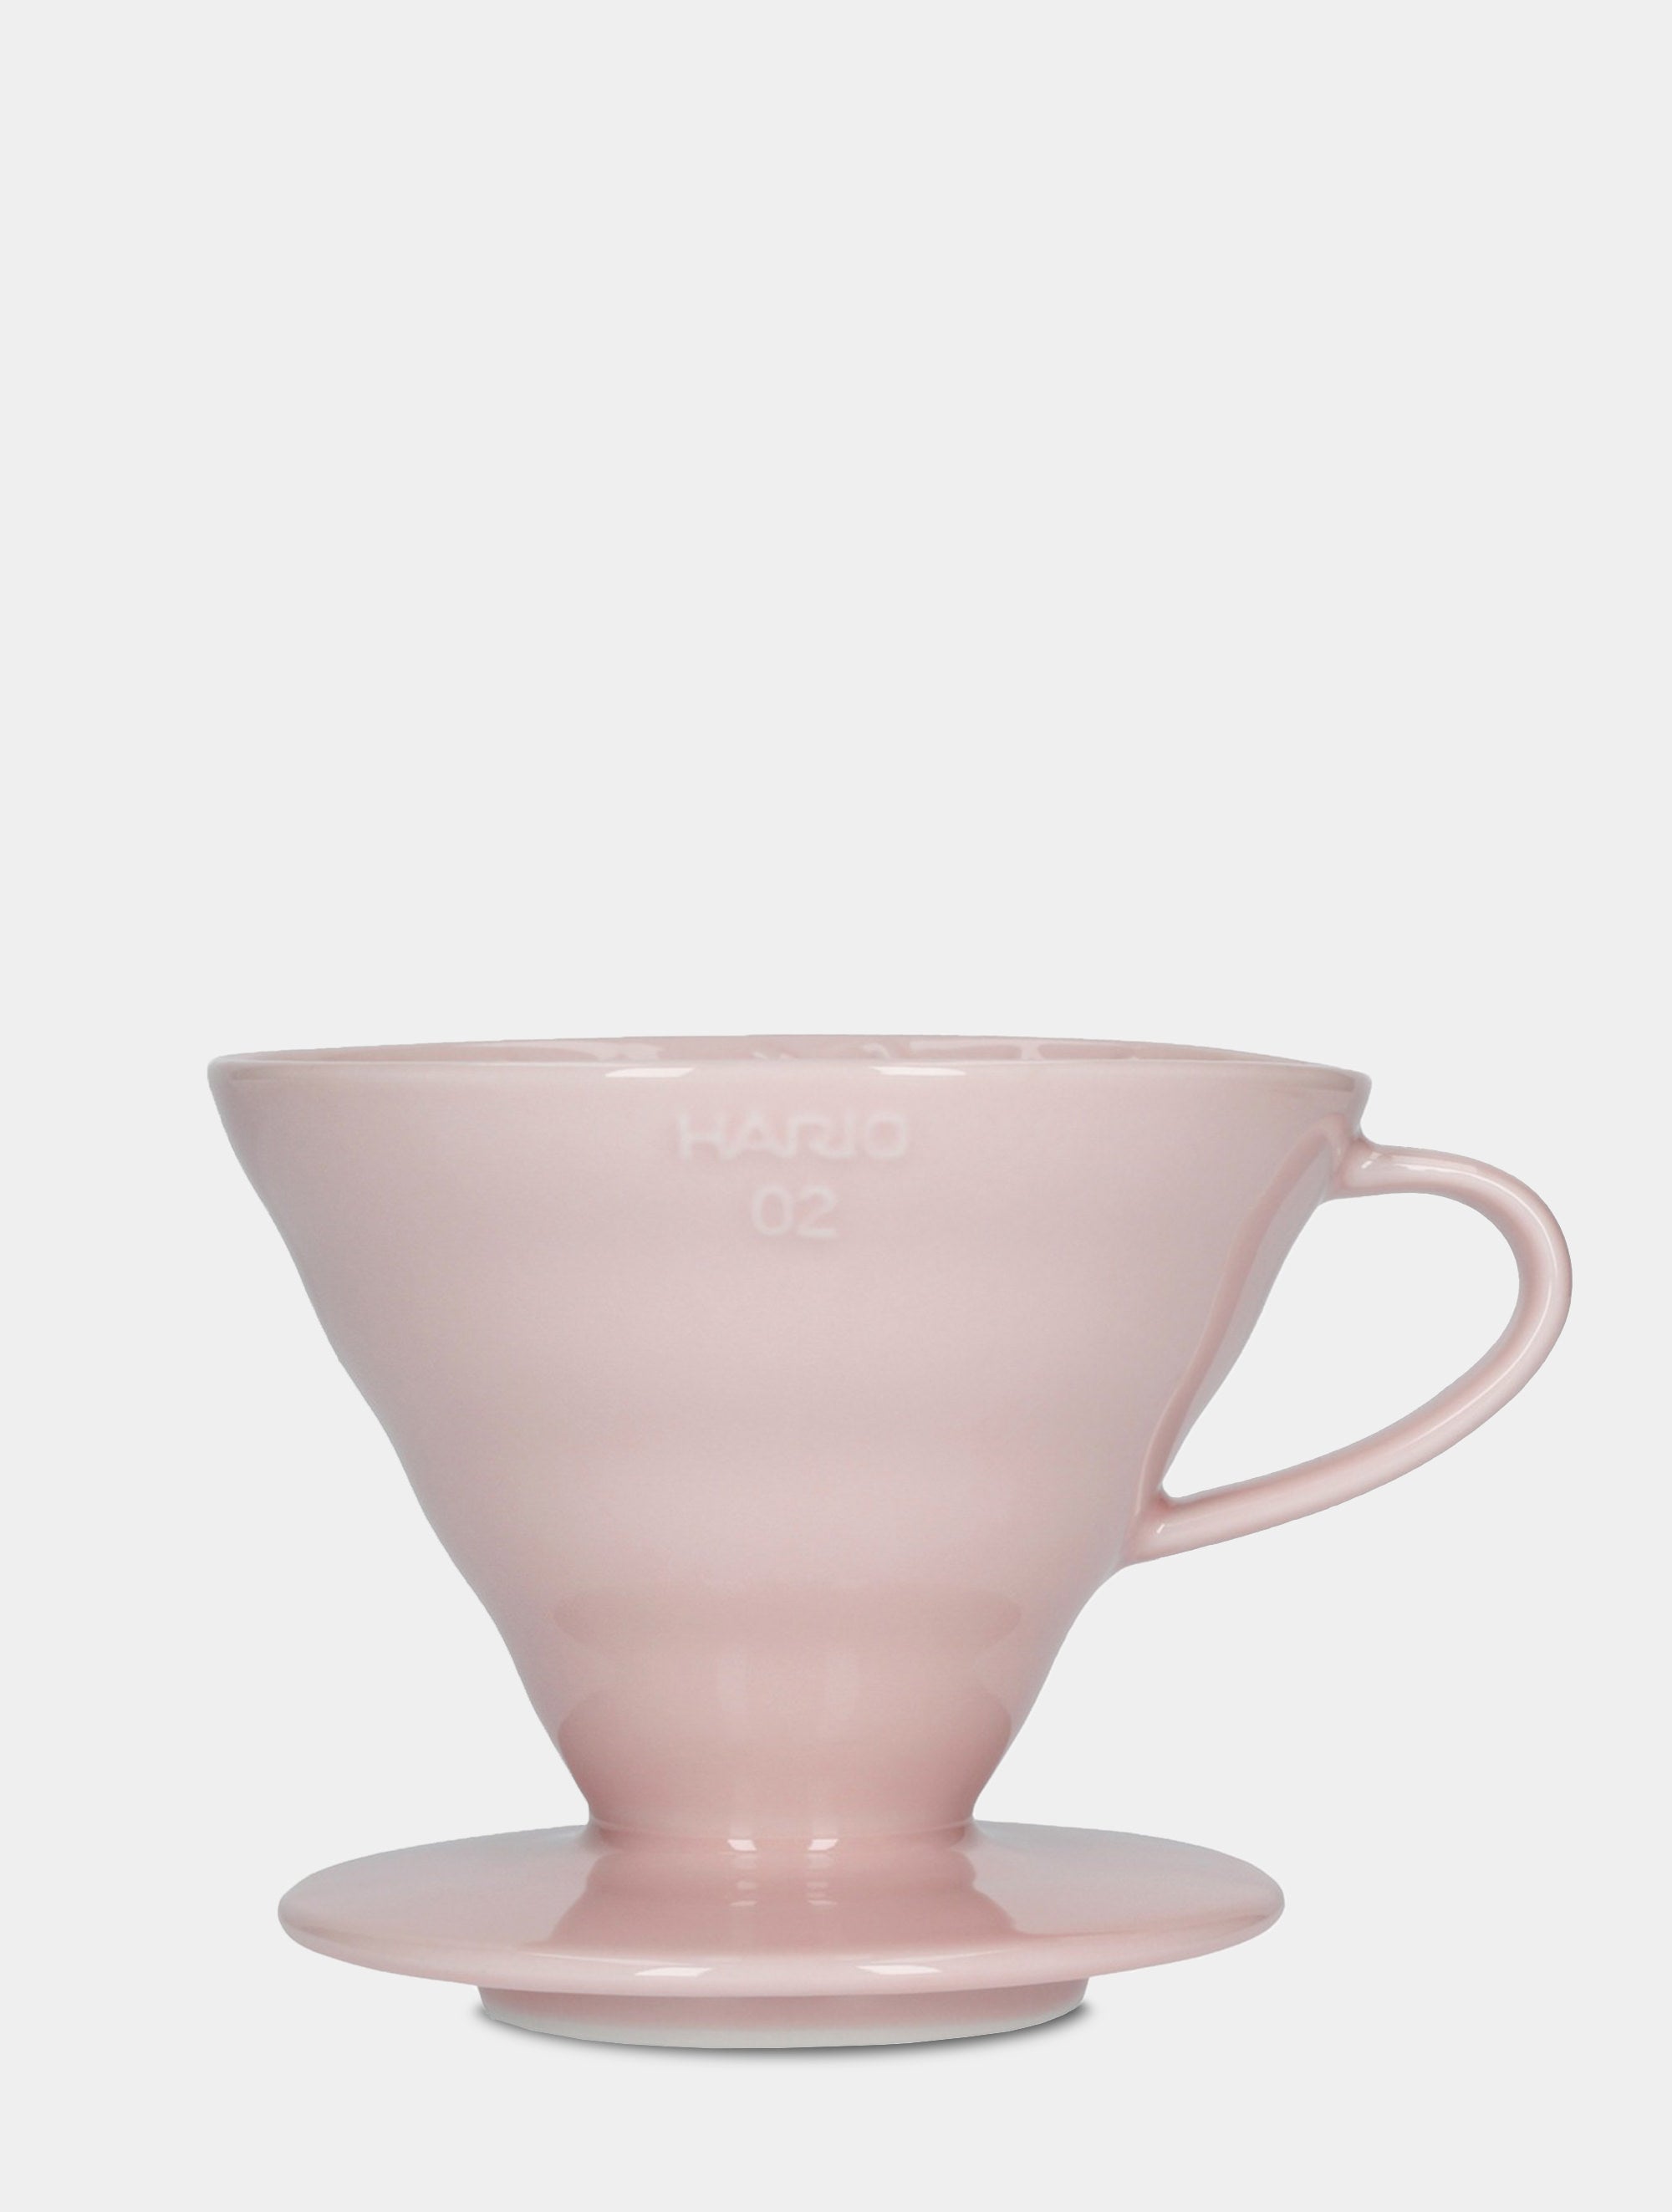 V60 Coffee Dripper "Colour Edition" pink